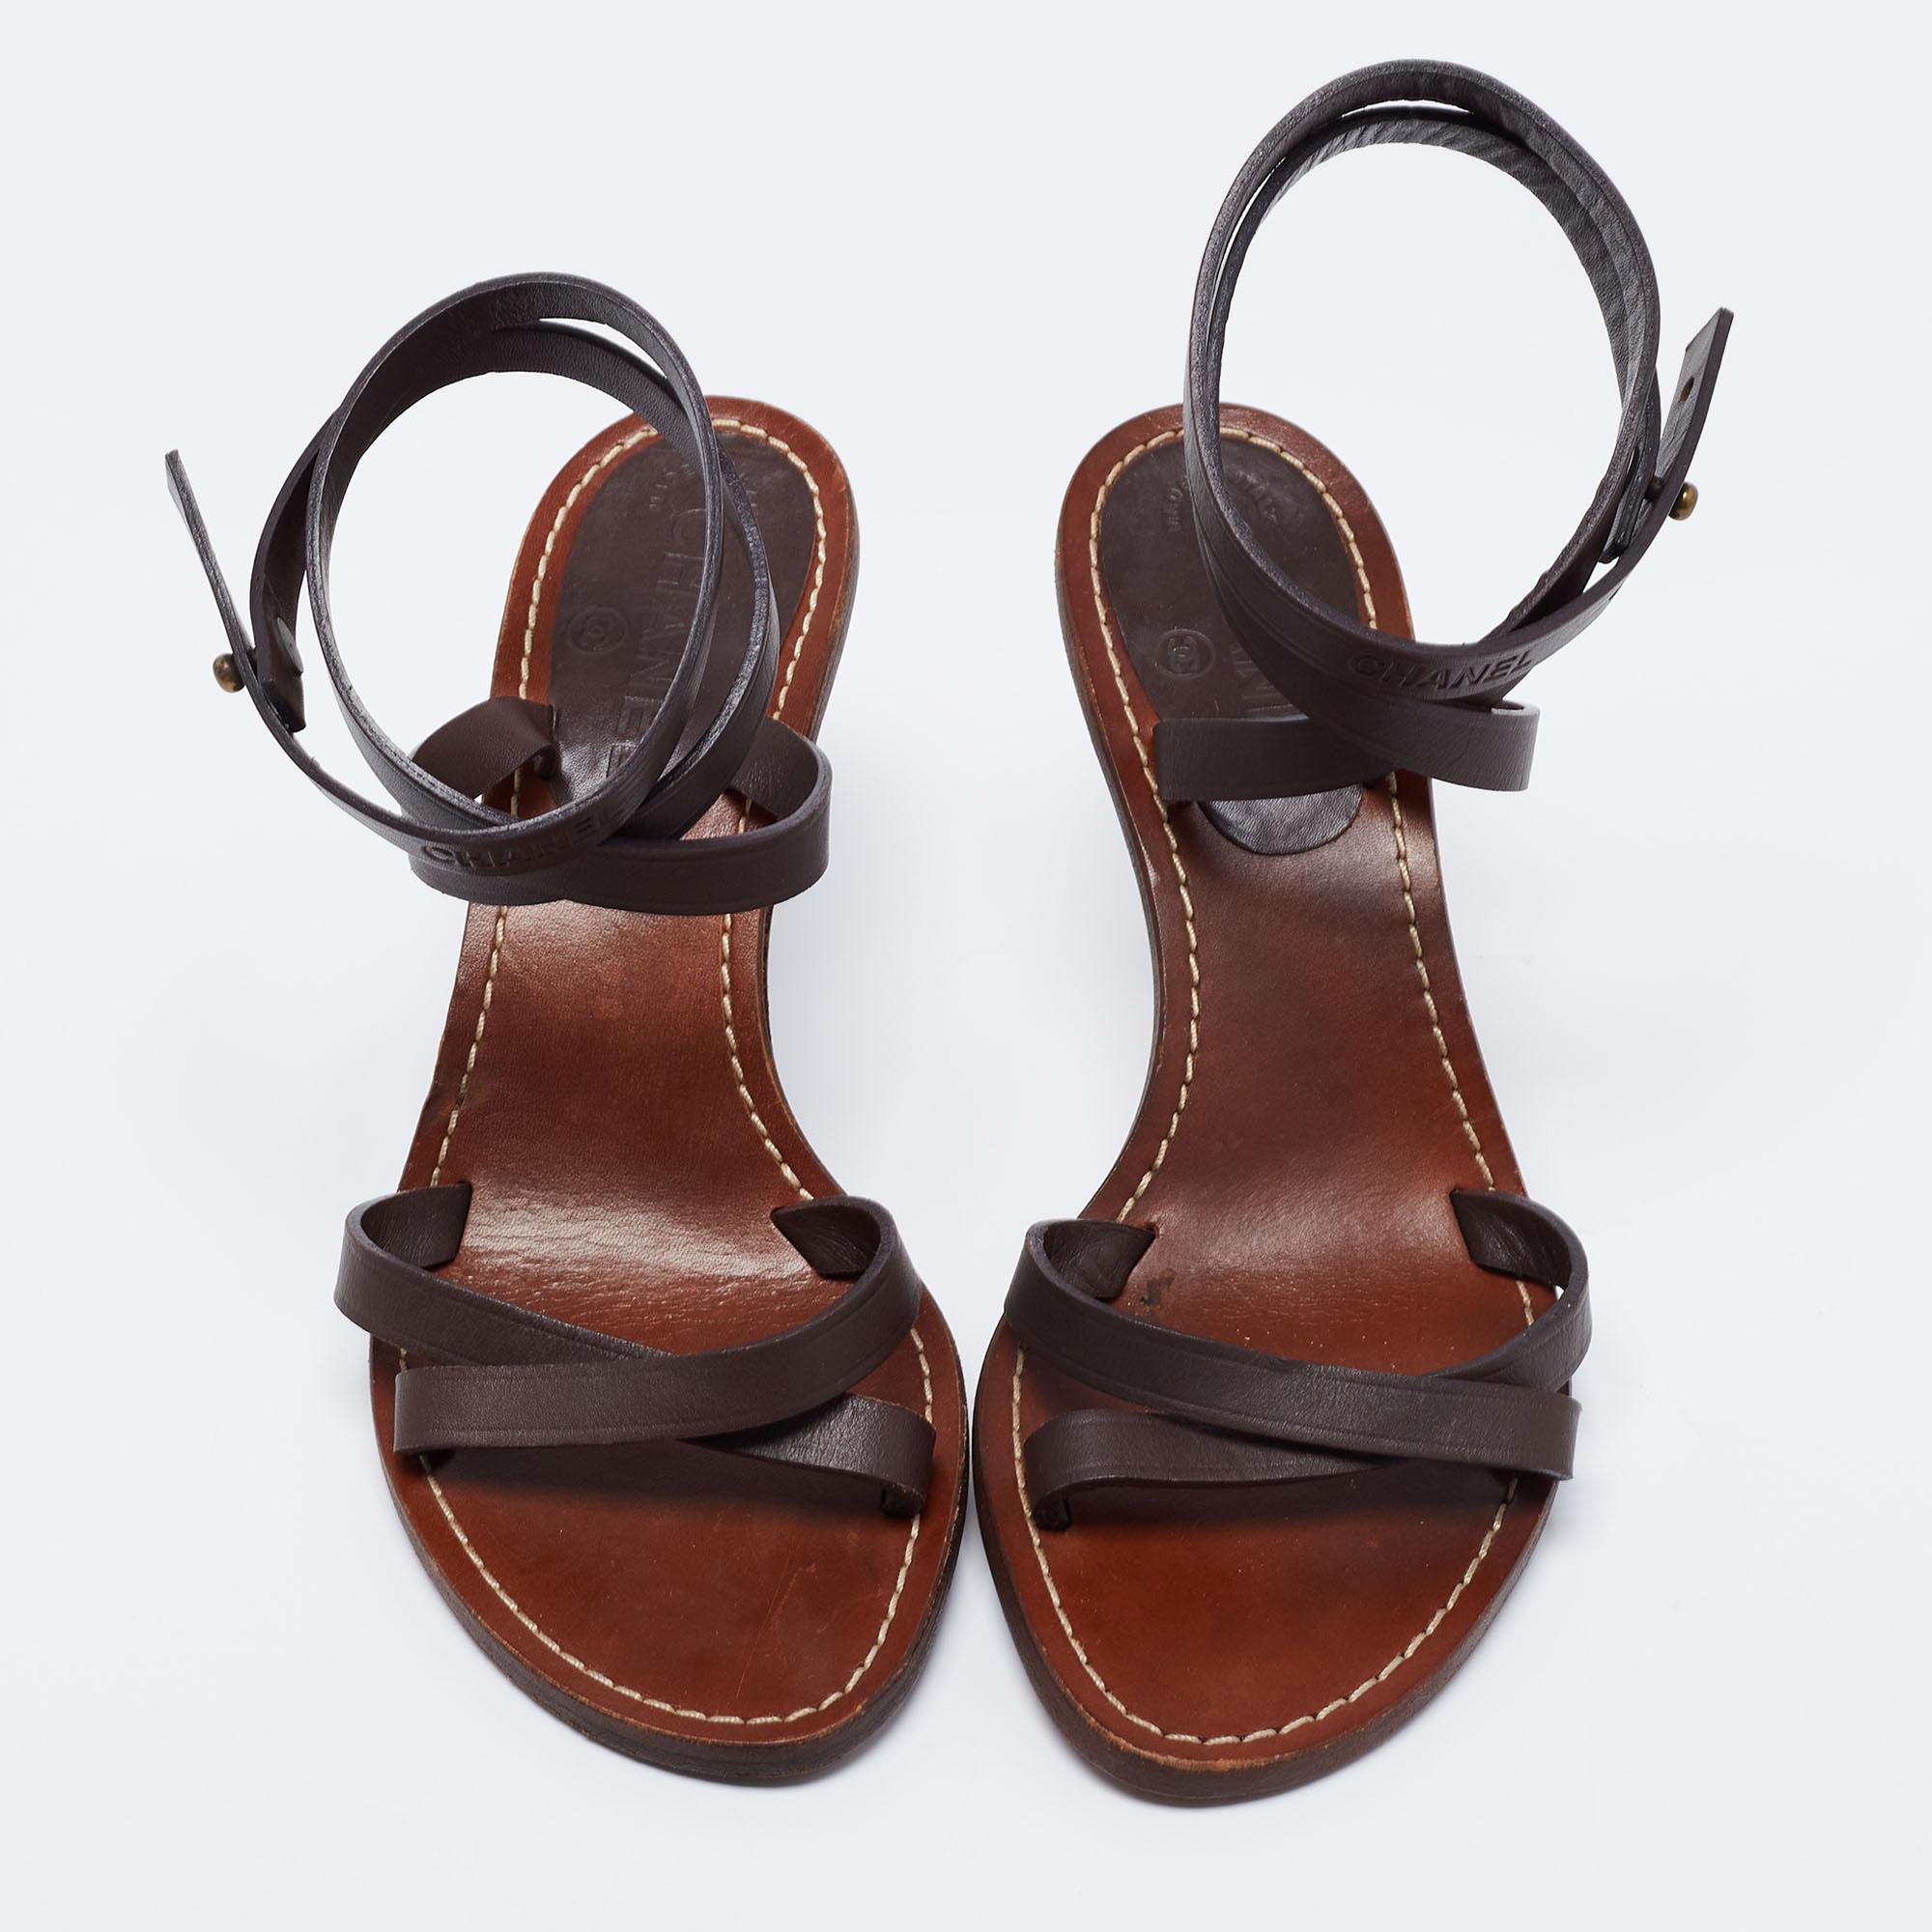 The ankle-wrap of these Chanel sandals will elegantly hug your feet. Created from leather, they flaunt a criss-cross strap on the vamps, 8.5cm heels, and button closure.

Includes: Original Dustbag

 